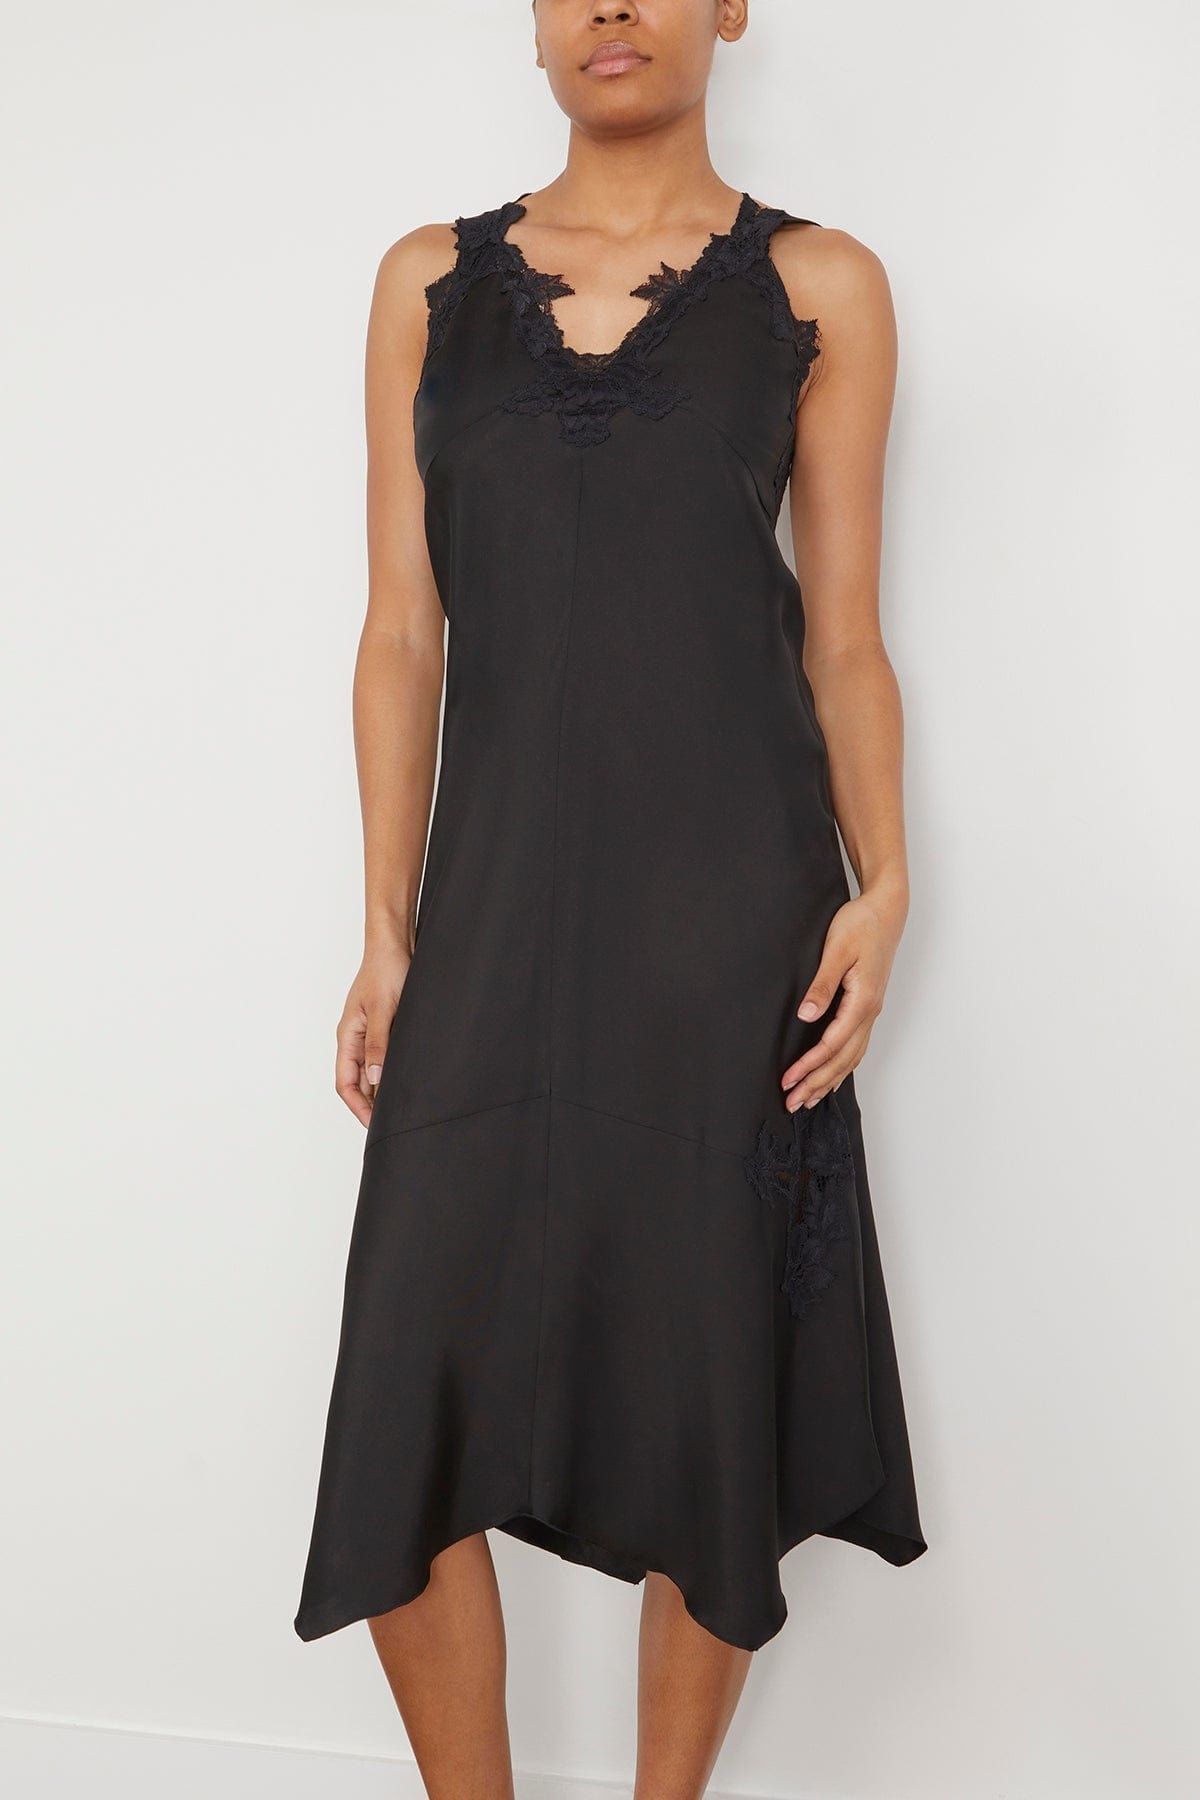 Sensual Coolness Dress in Pure Black - 3